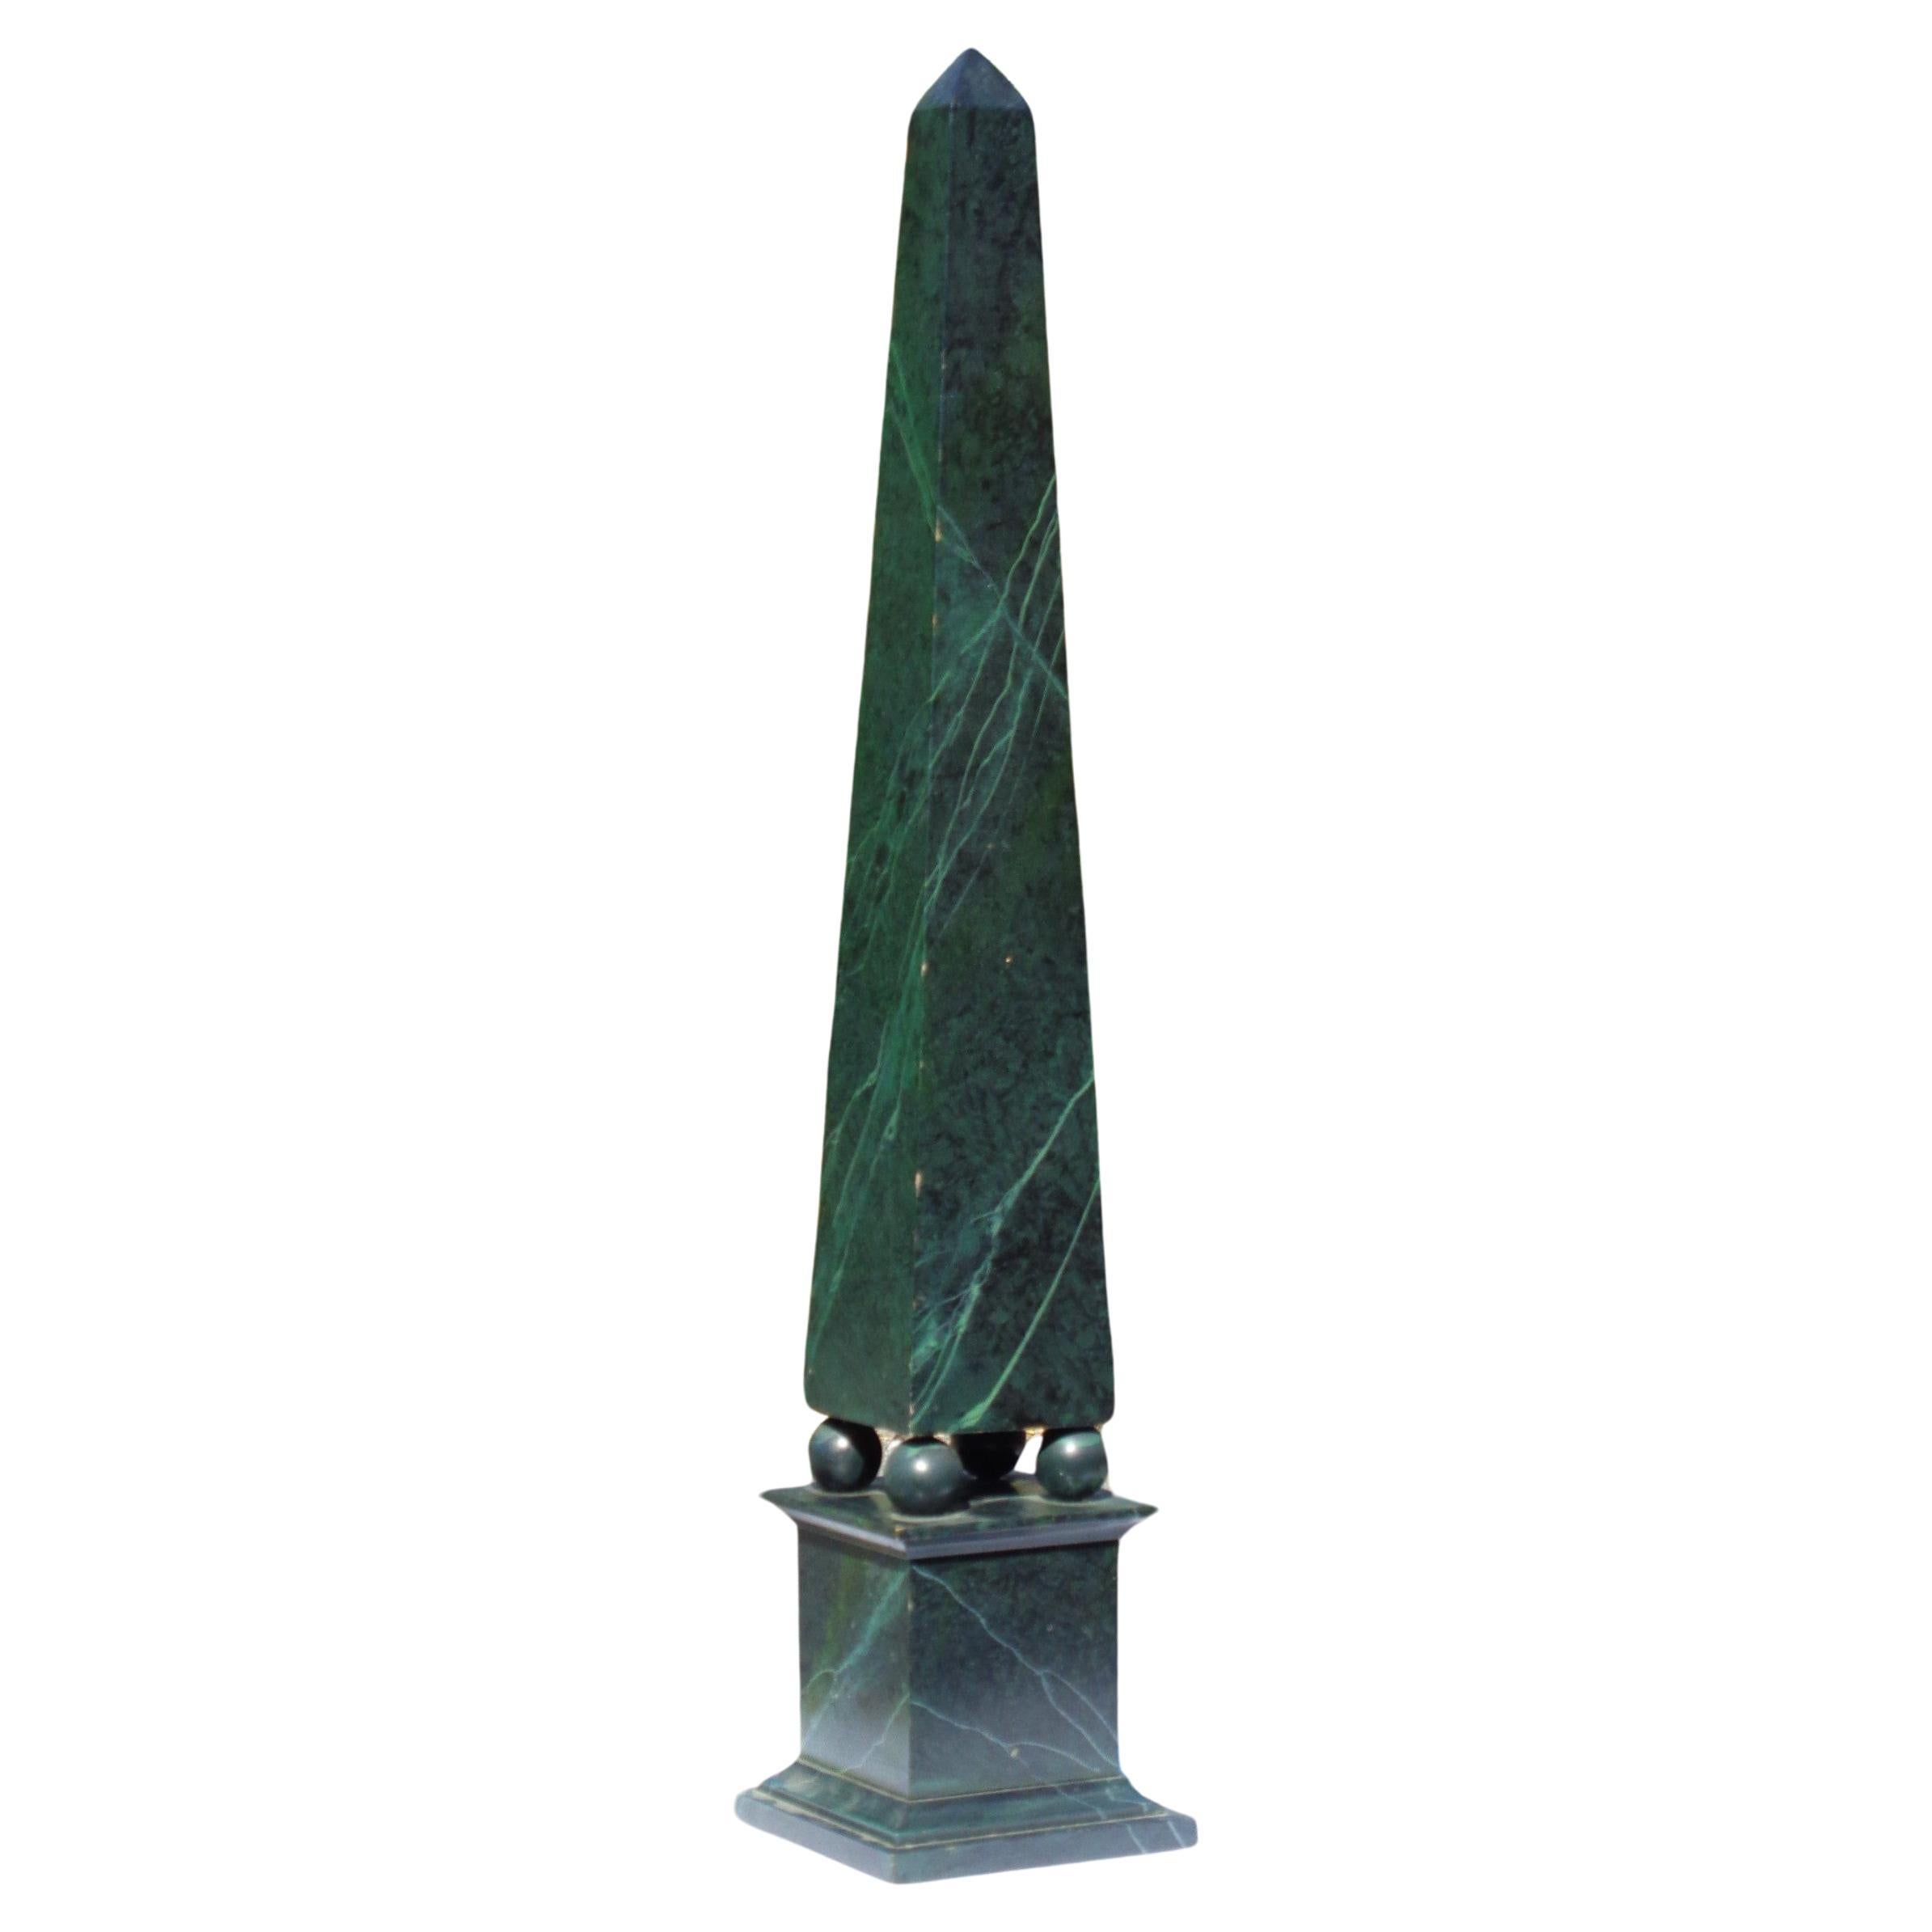 Large Neoclassical Style Faux Verde Antigua Marbleized Wood Obelisk, 1960's For Sale